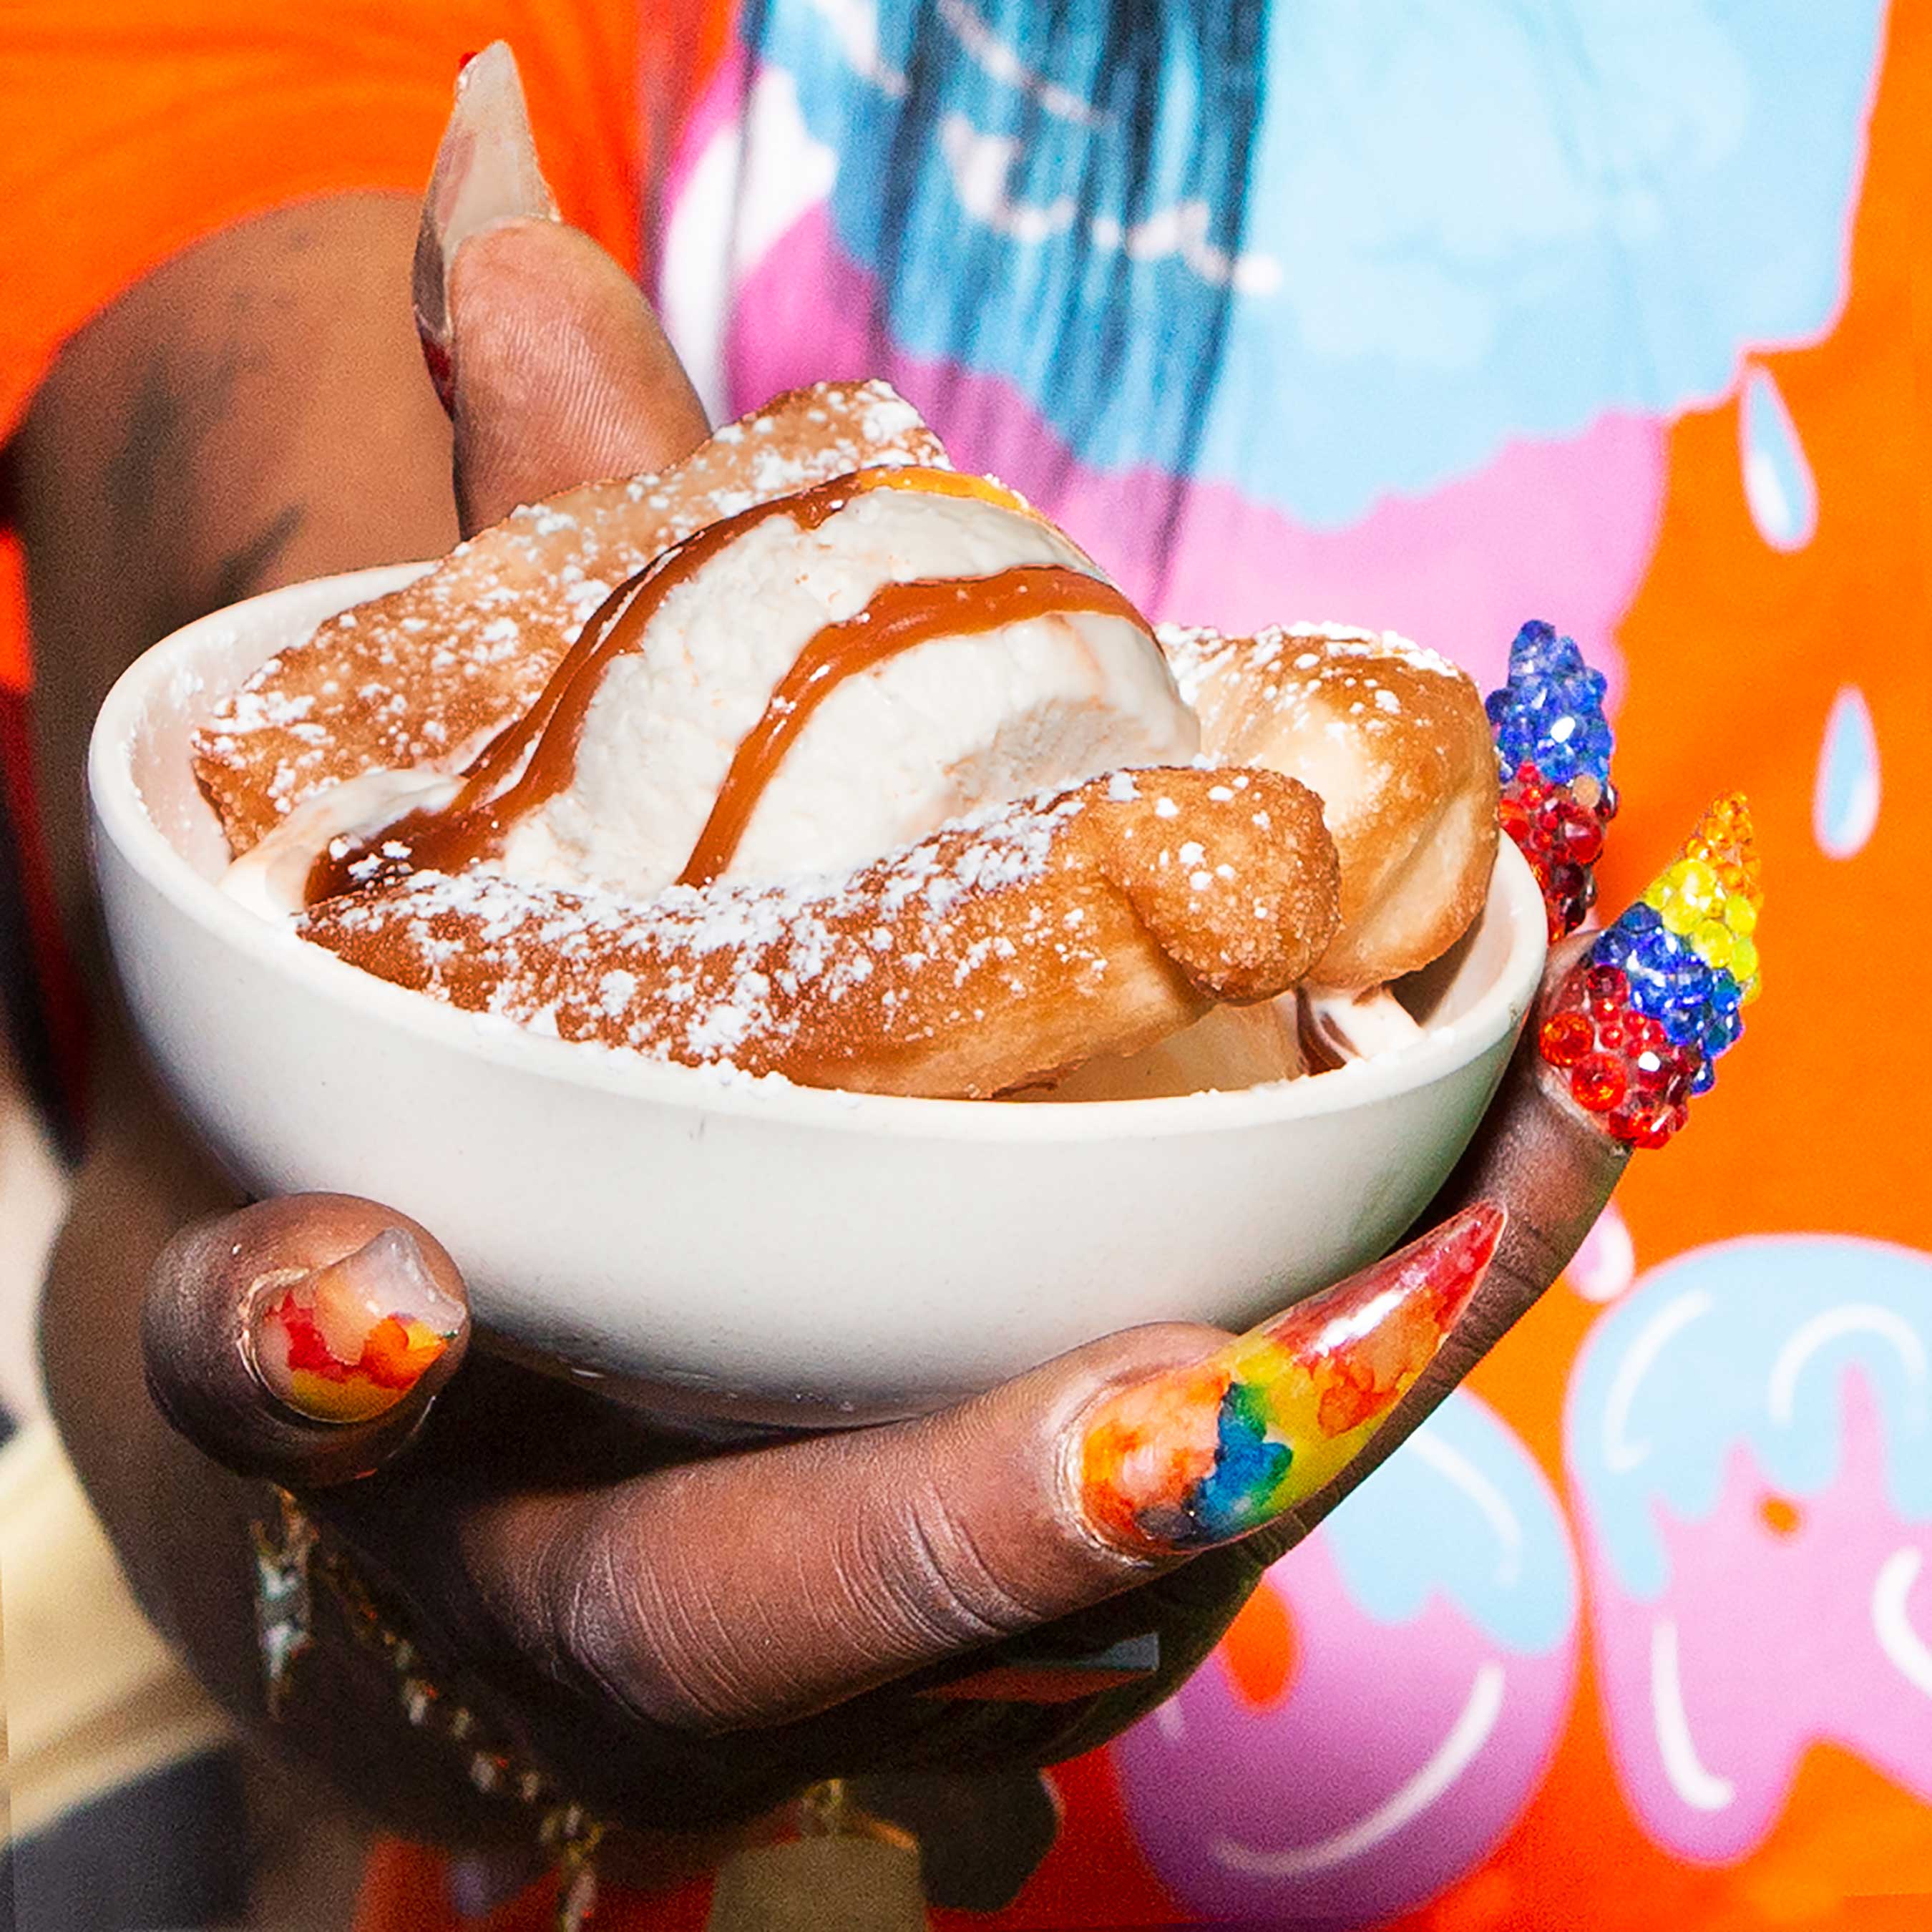 Bouncing Beignets is a vanilla ice cream with a bourbon caramel swirl and was served with beignets.